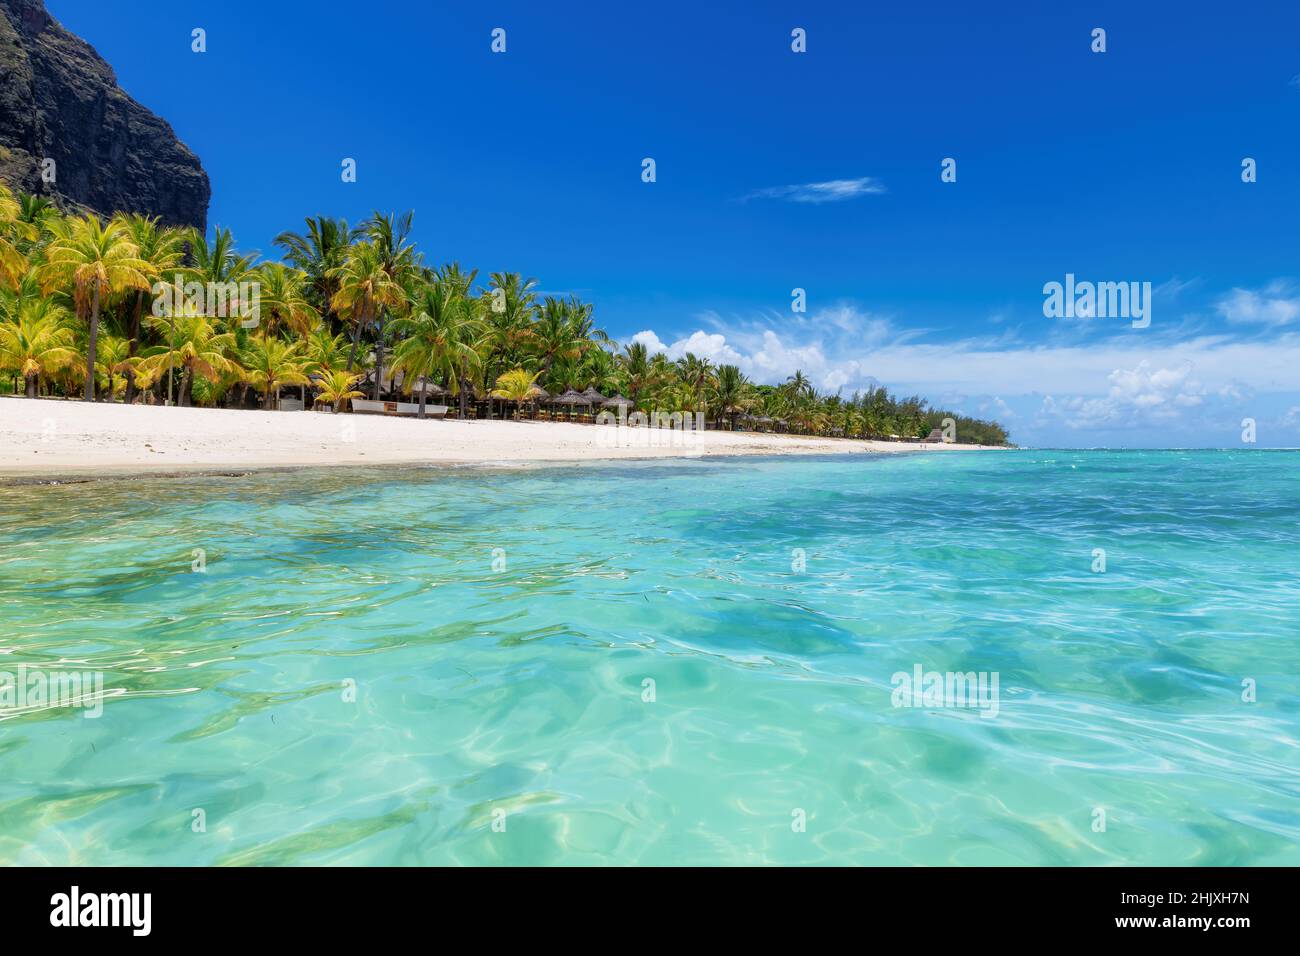 Beautiful Le Morne beach with palm trees from tropical sea in Mauritius island. Stock Photo